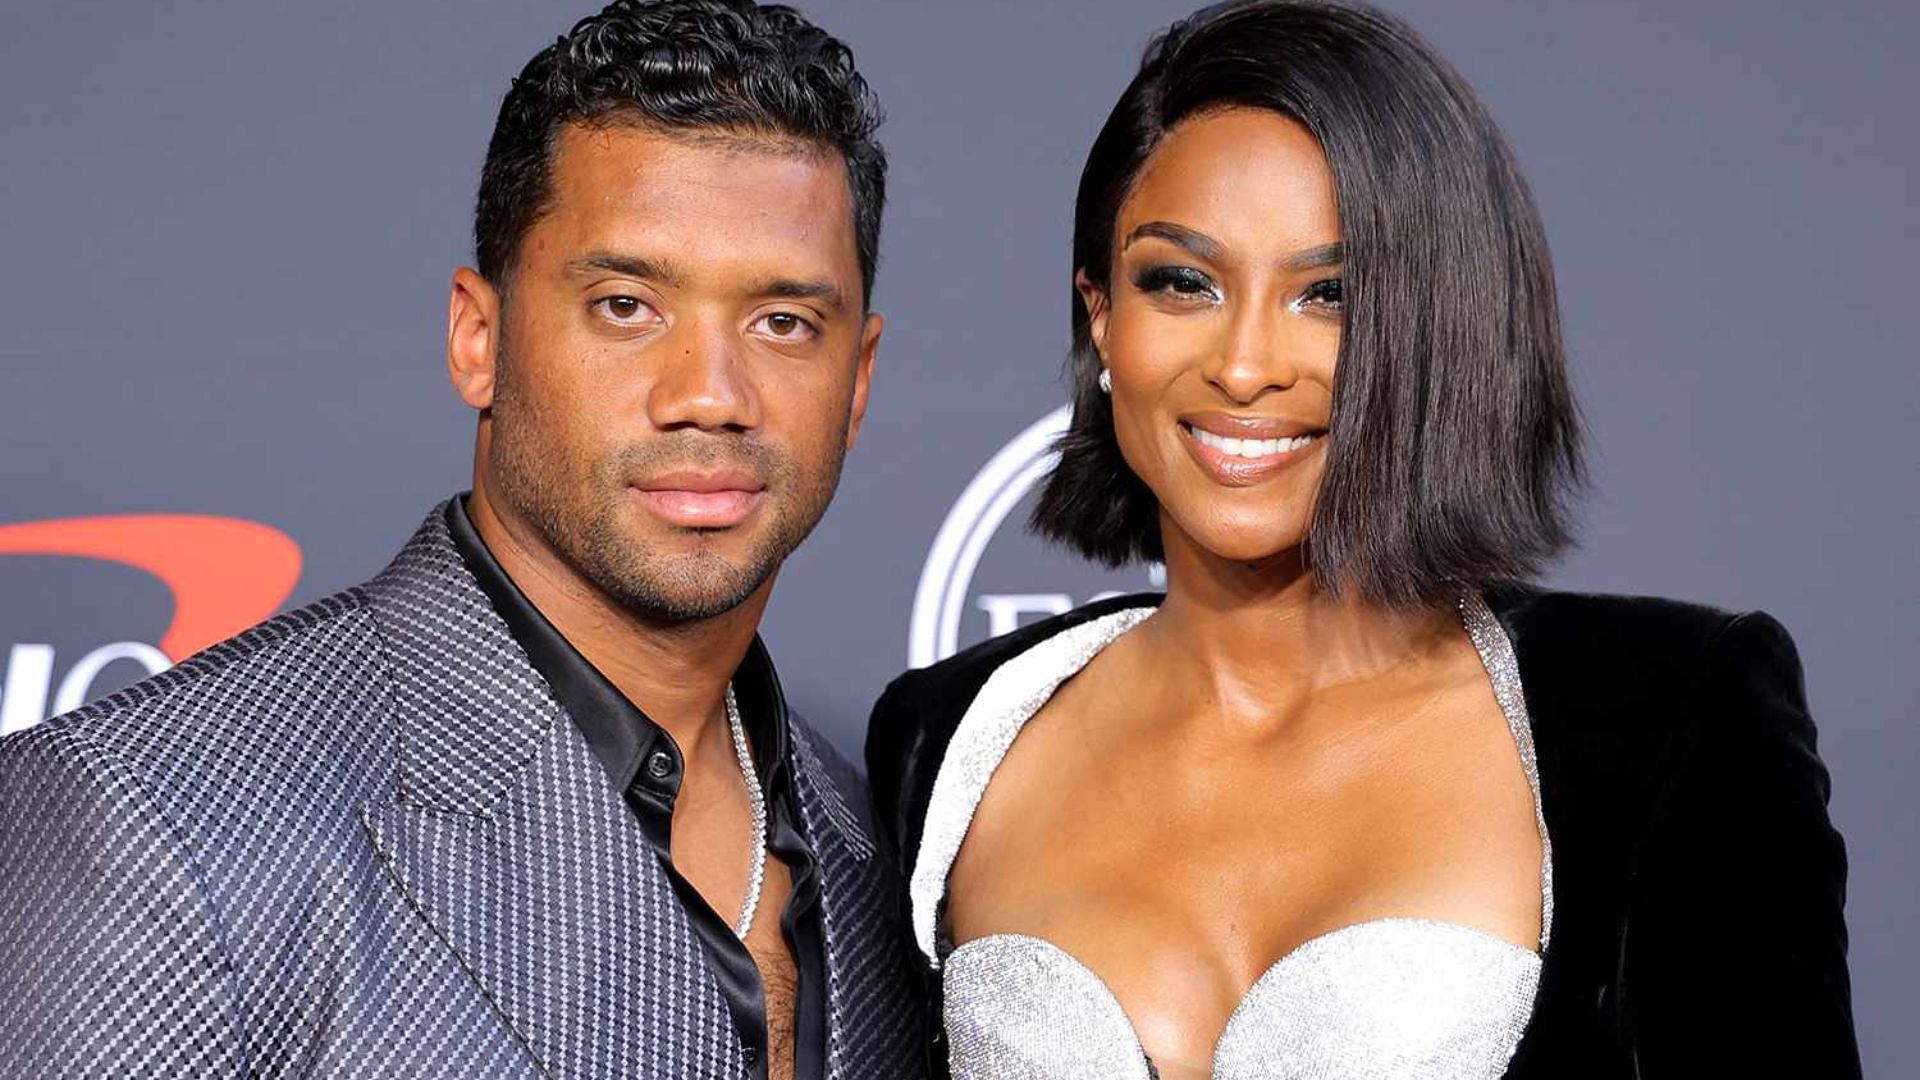 Russell Wilson and Ciara go out on a date before the Broncos game against Washington.